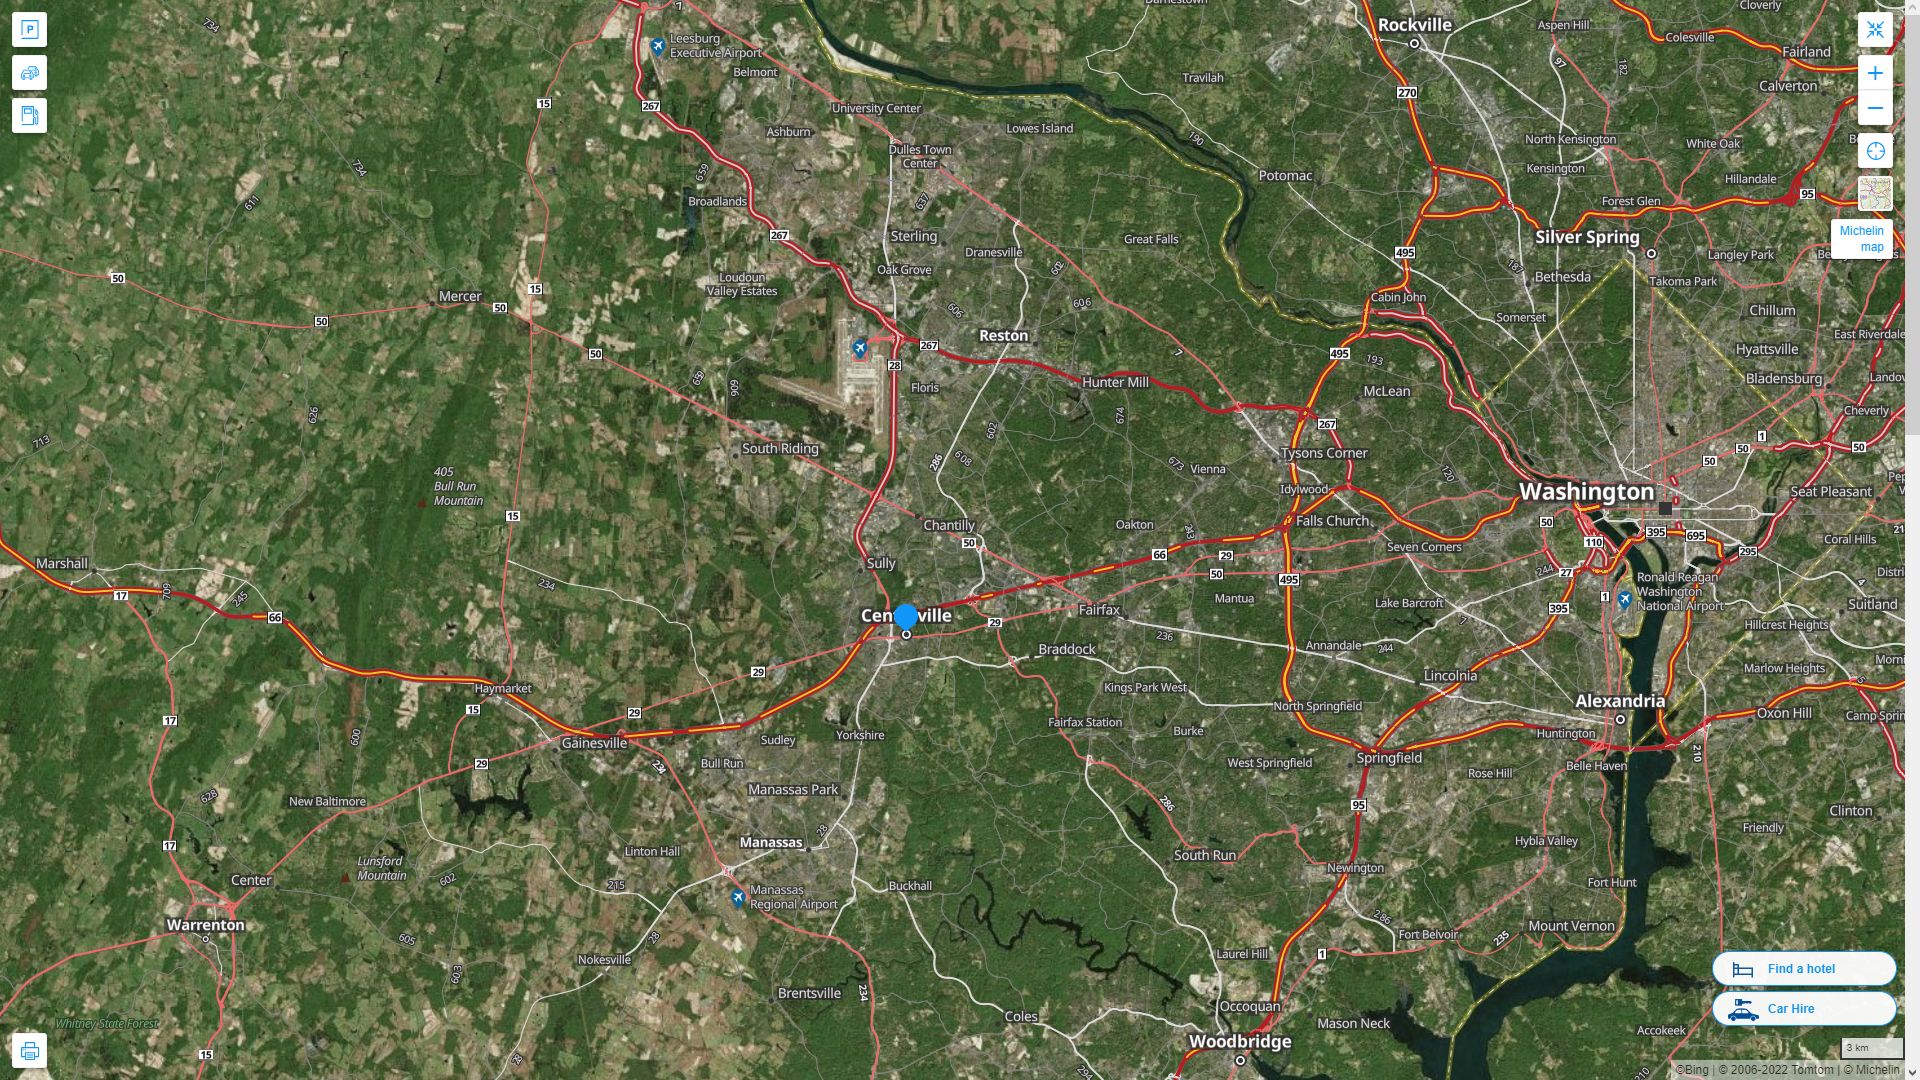 Centreville Virginia Highway and Road Map with Satellite View